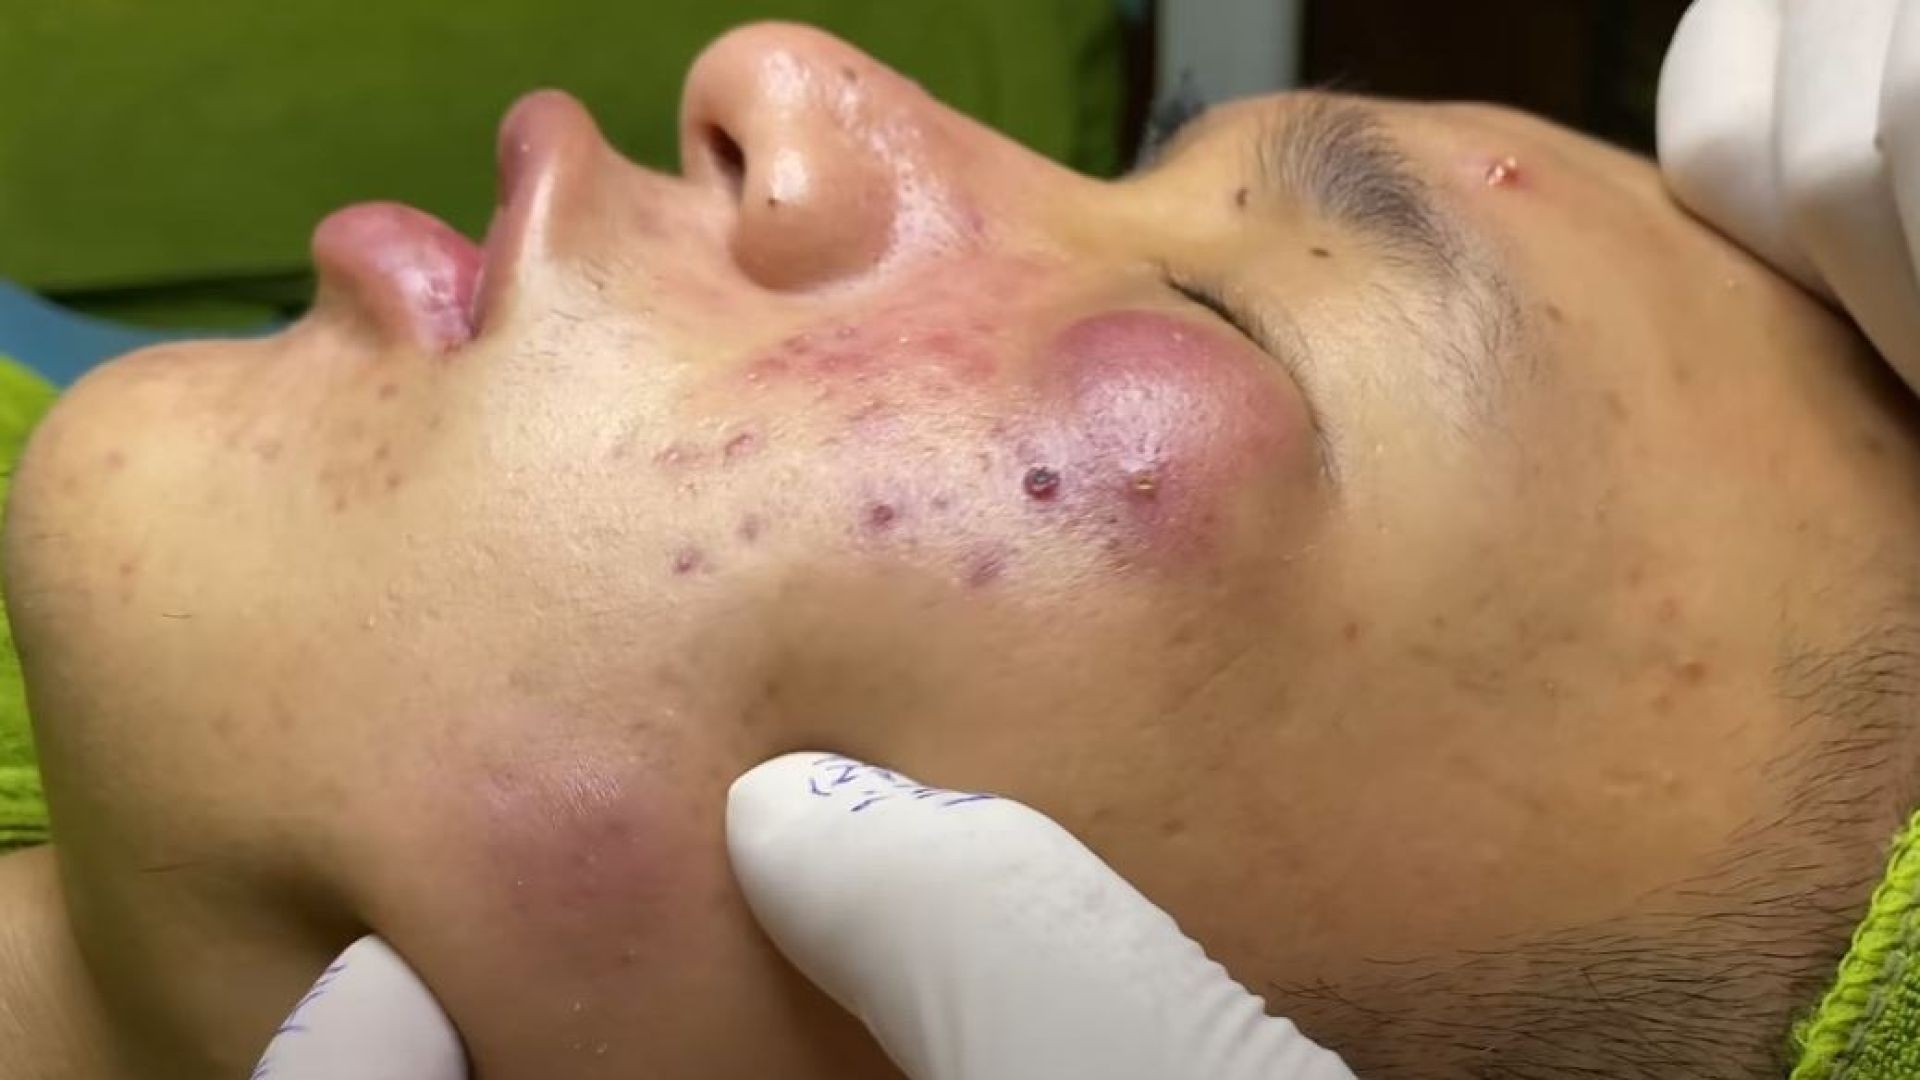 Infected cyst on the face